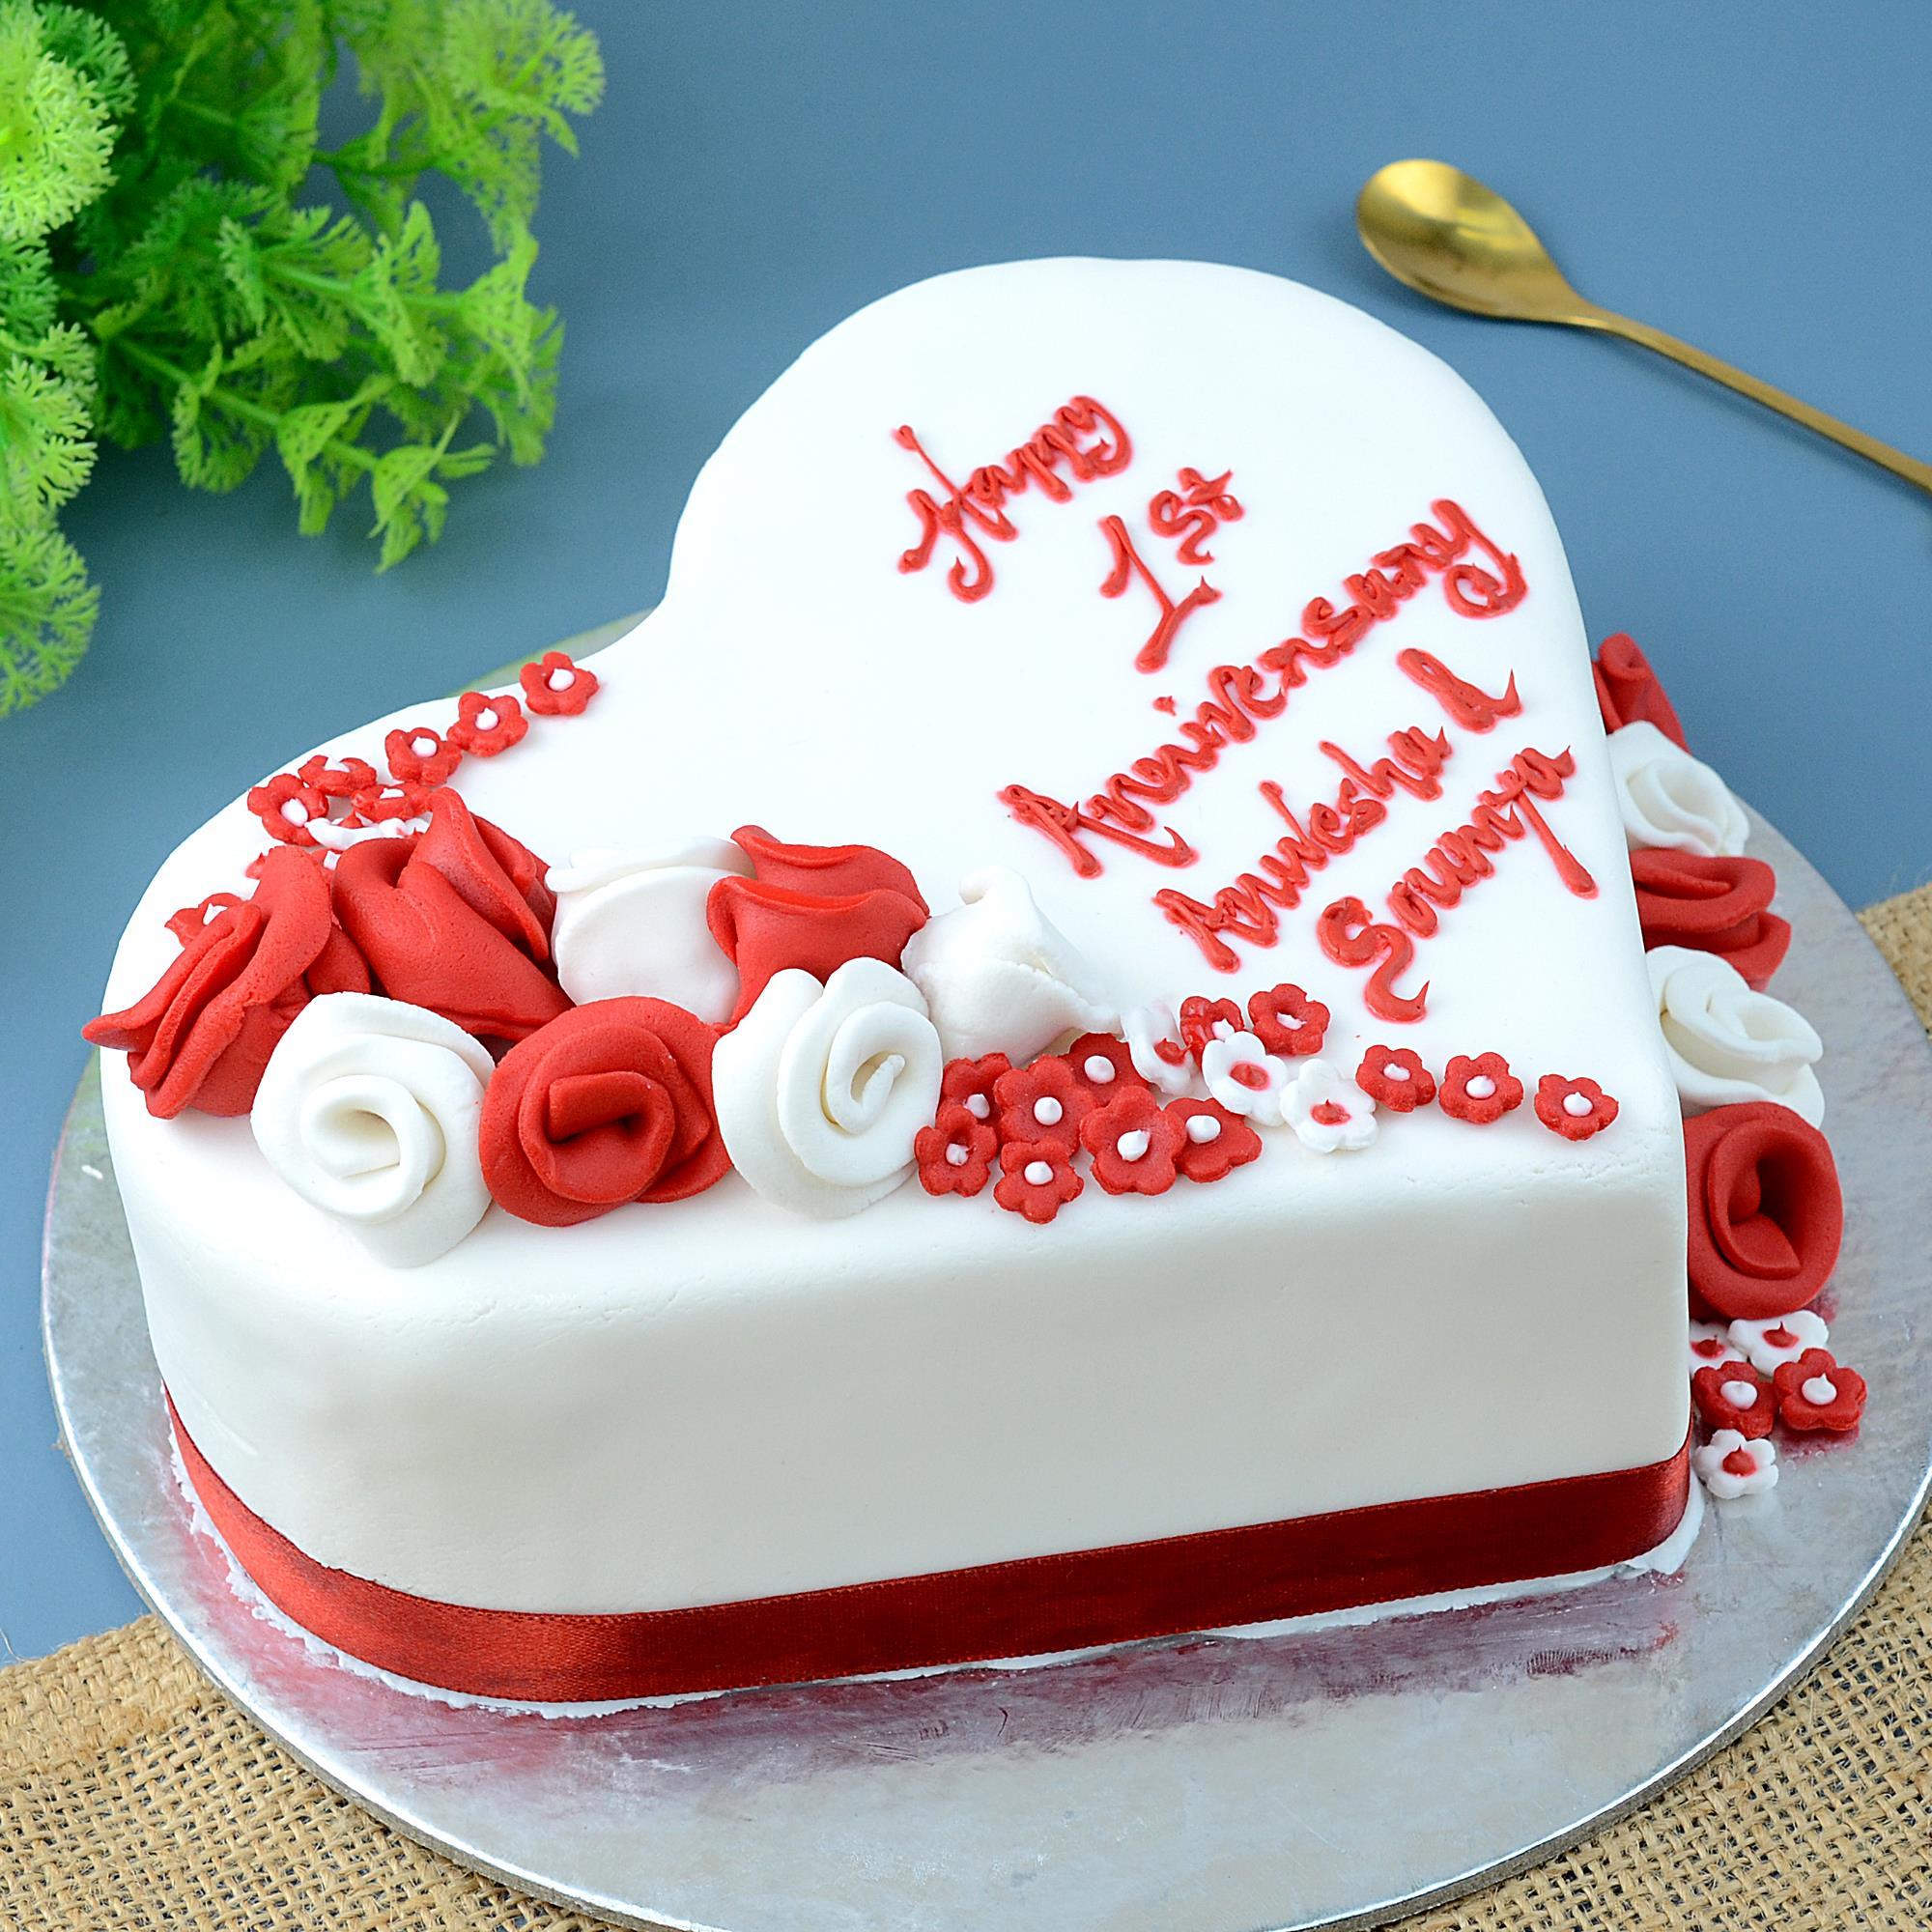 1st Marriage Anniversary Cake Ideas For The Newlyweds !